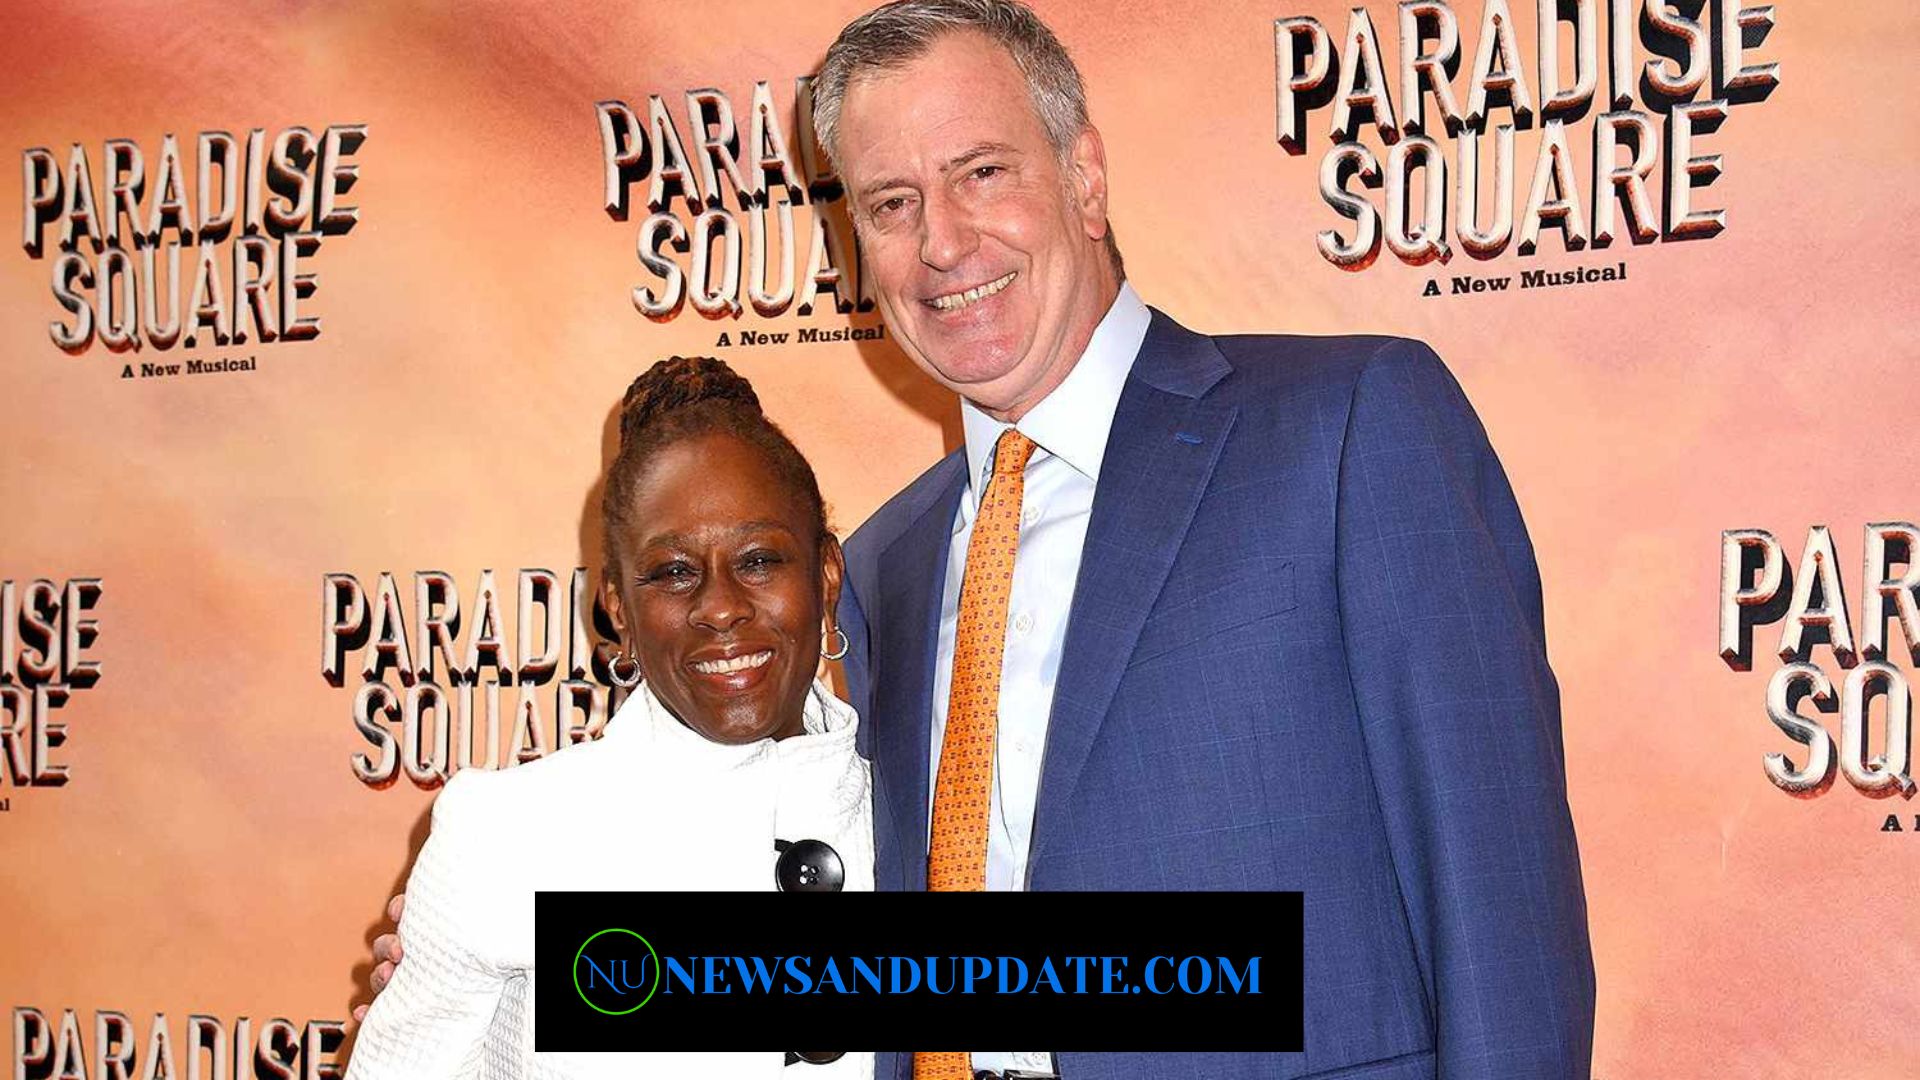 Bill De Blasio’s Wife Chirlane McCray: The Couple Announced Their Separation